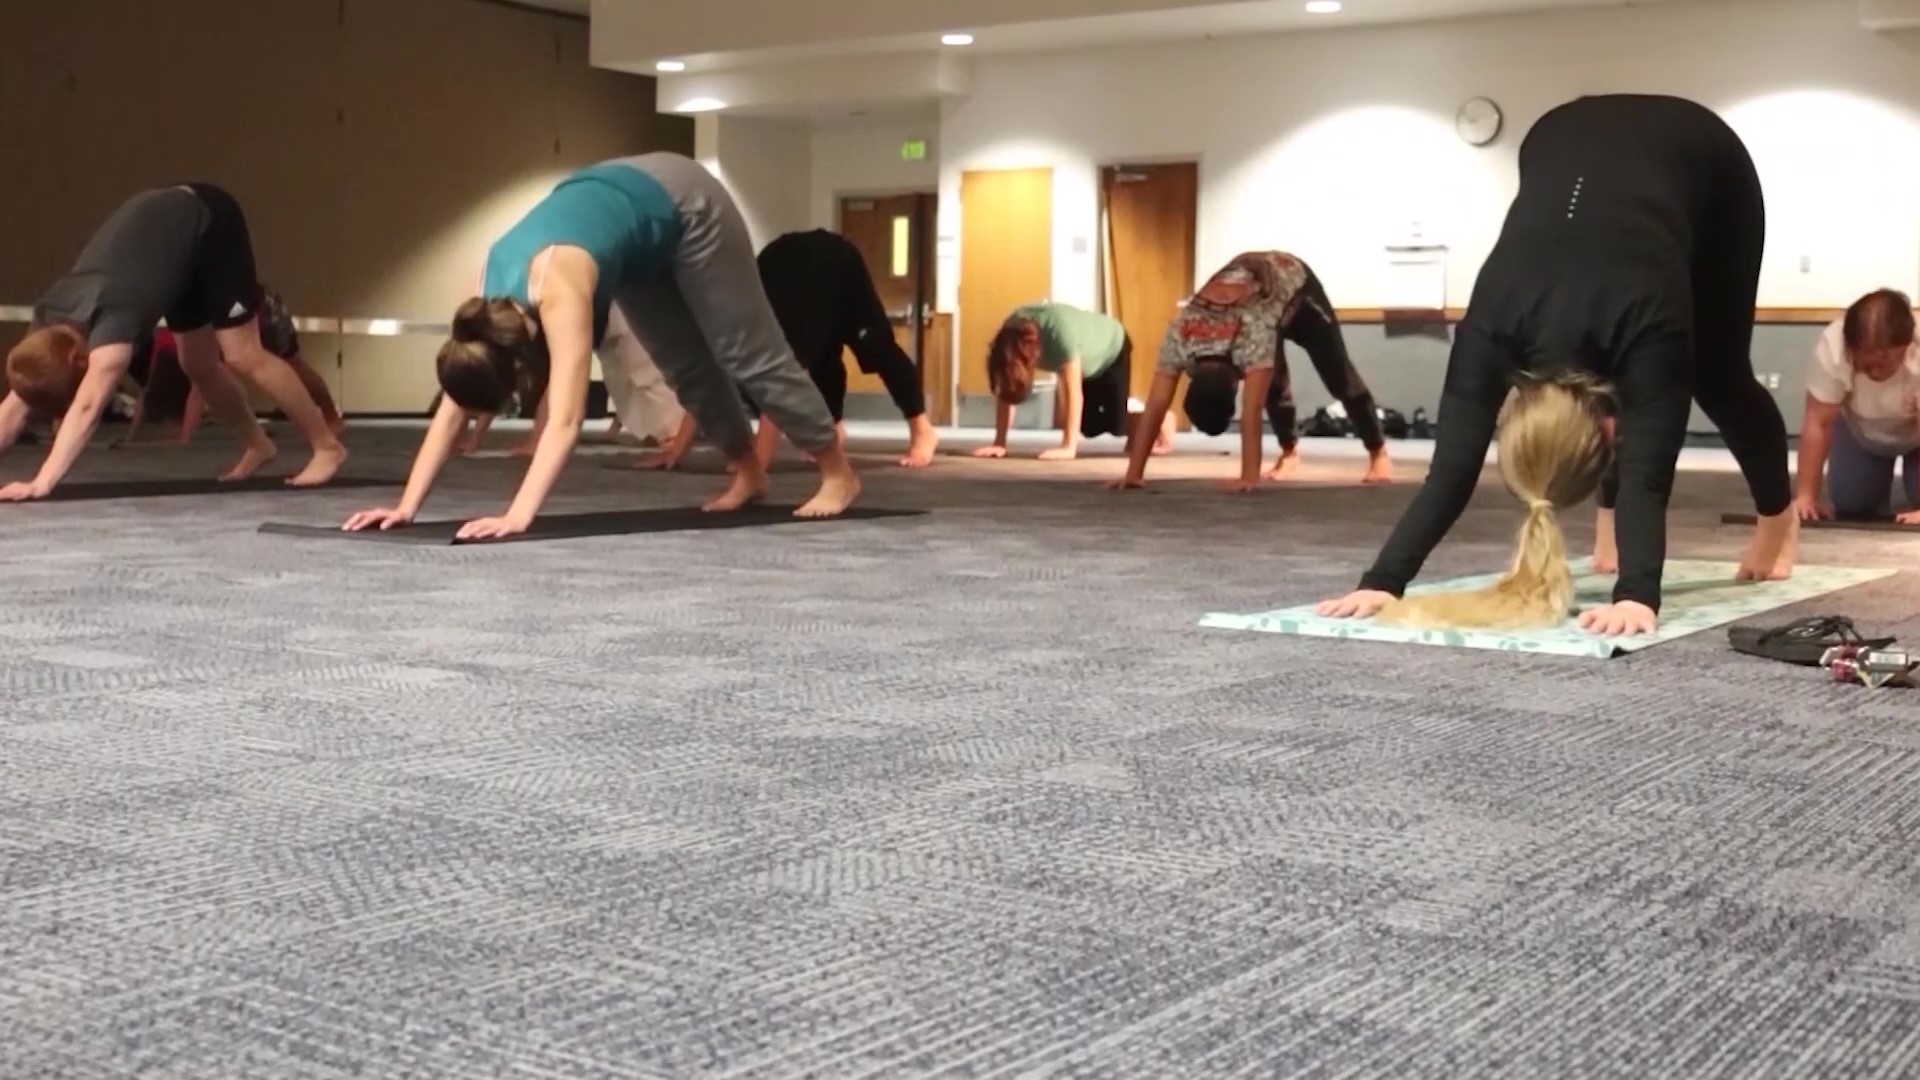 Yoga Club teaches students mindfulness and relaxation - The Daily Universe